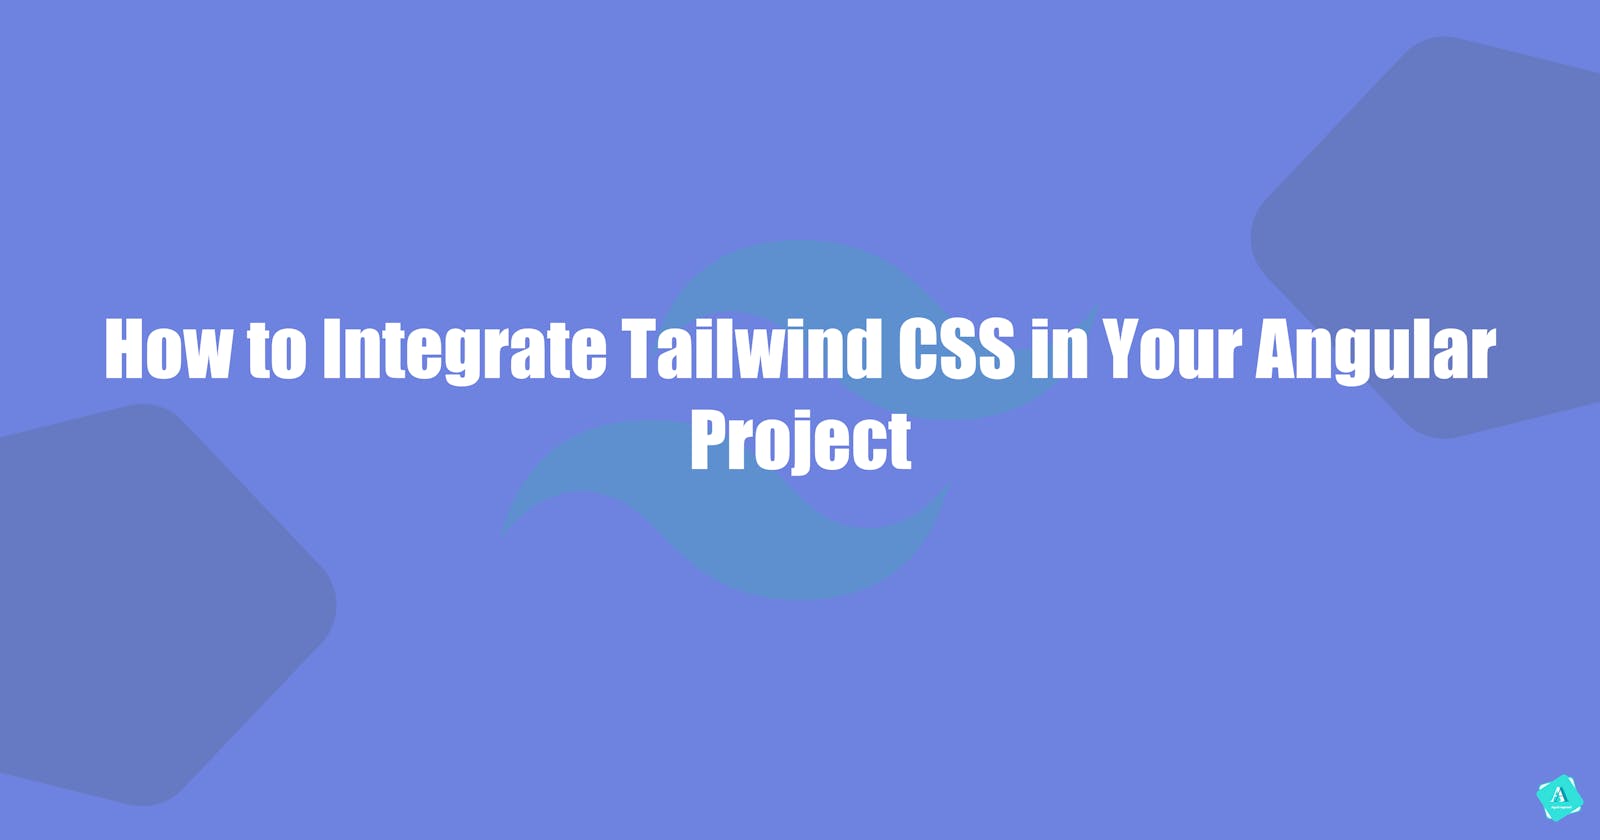 How to Integrate Tailwind CSS in Your Angular Project